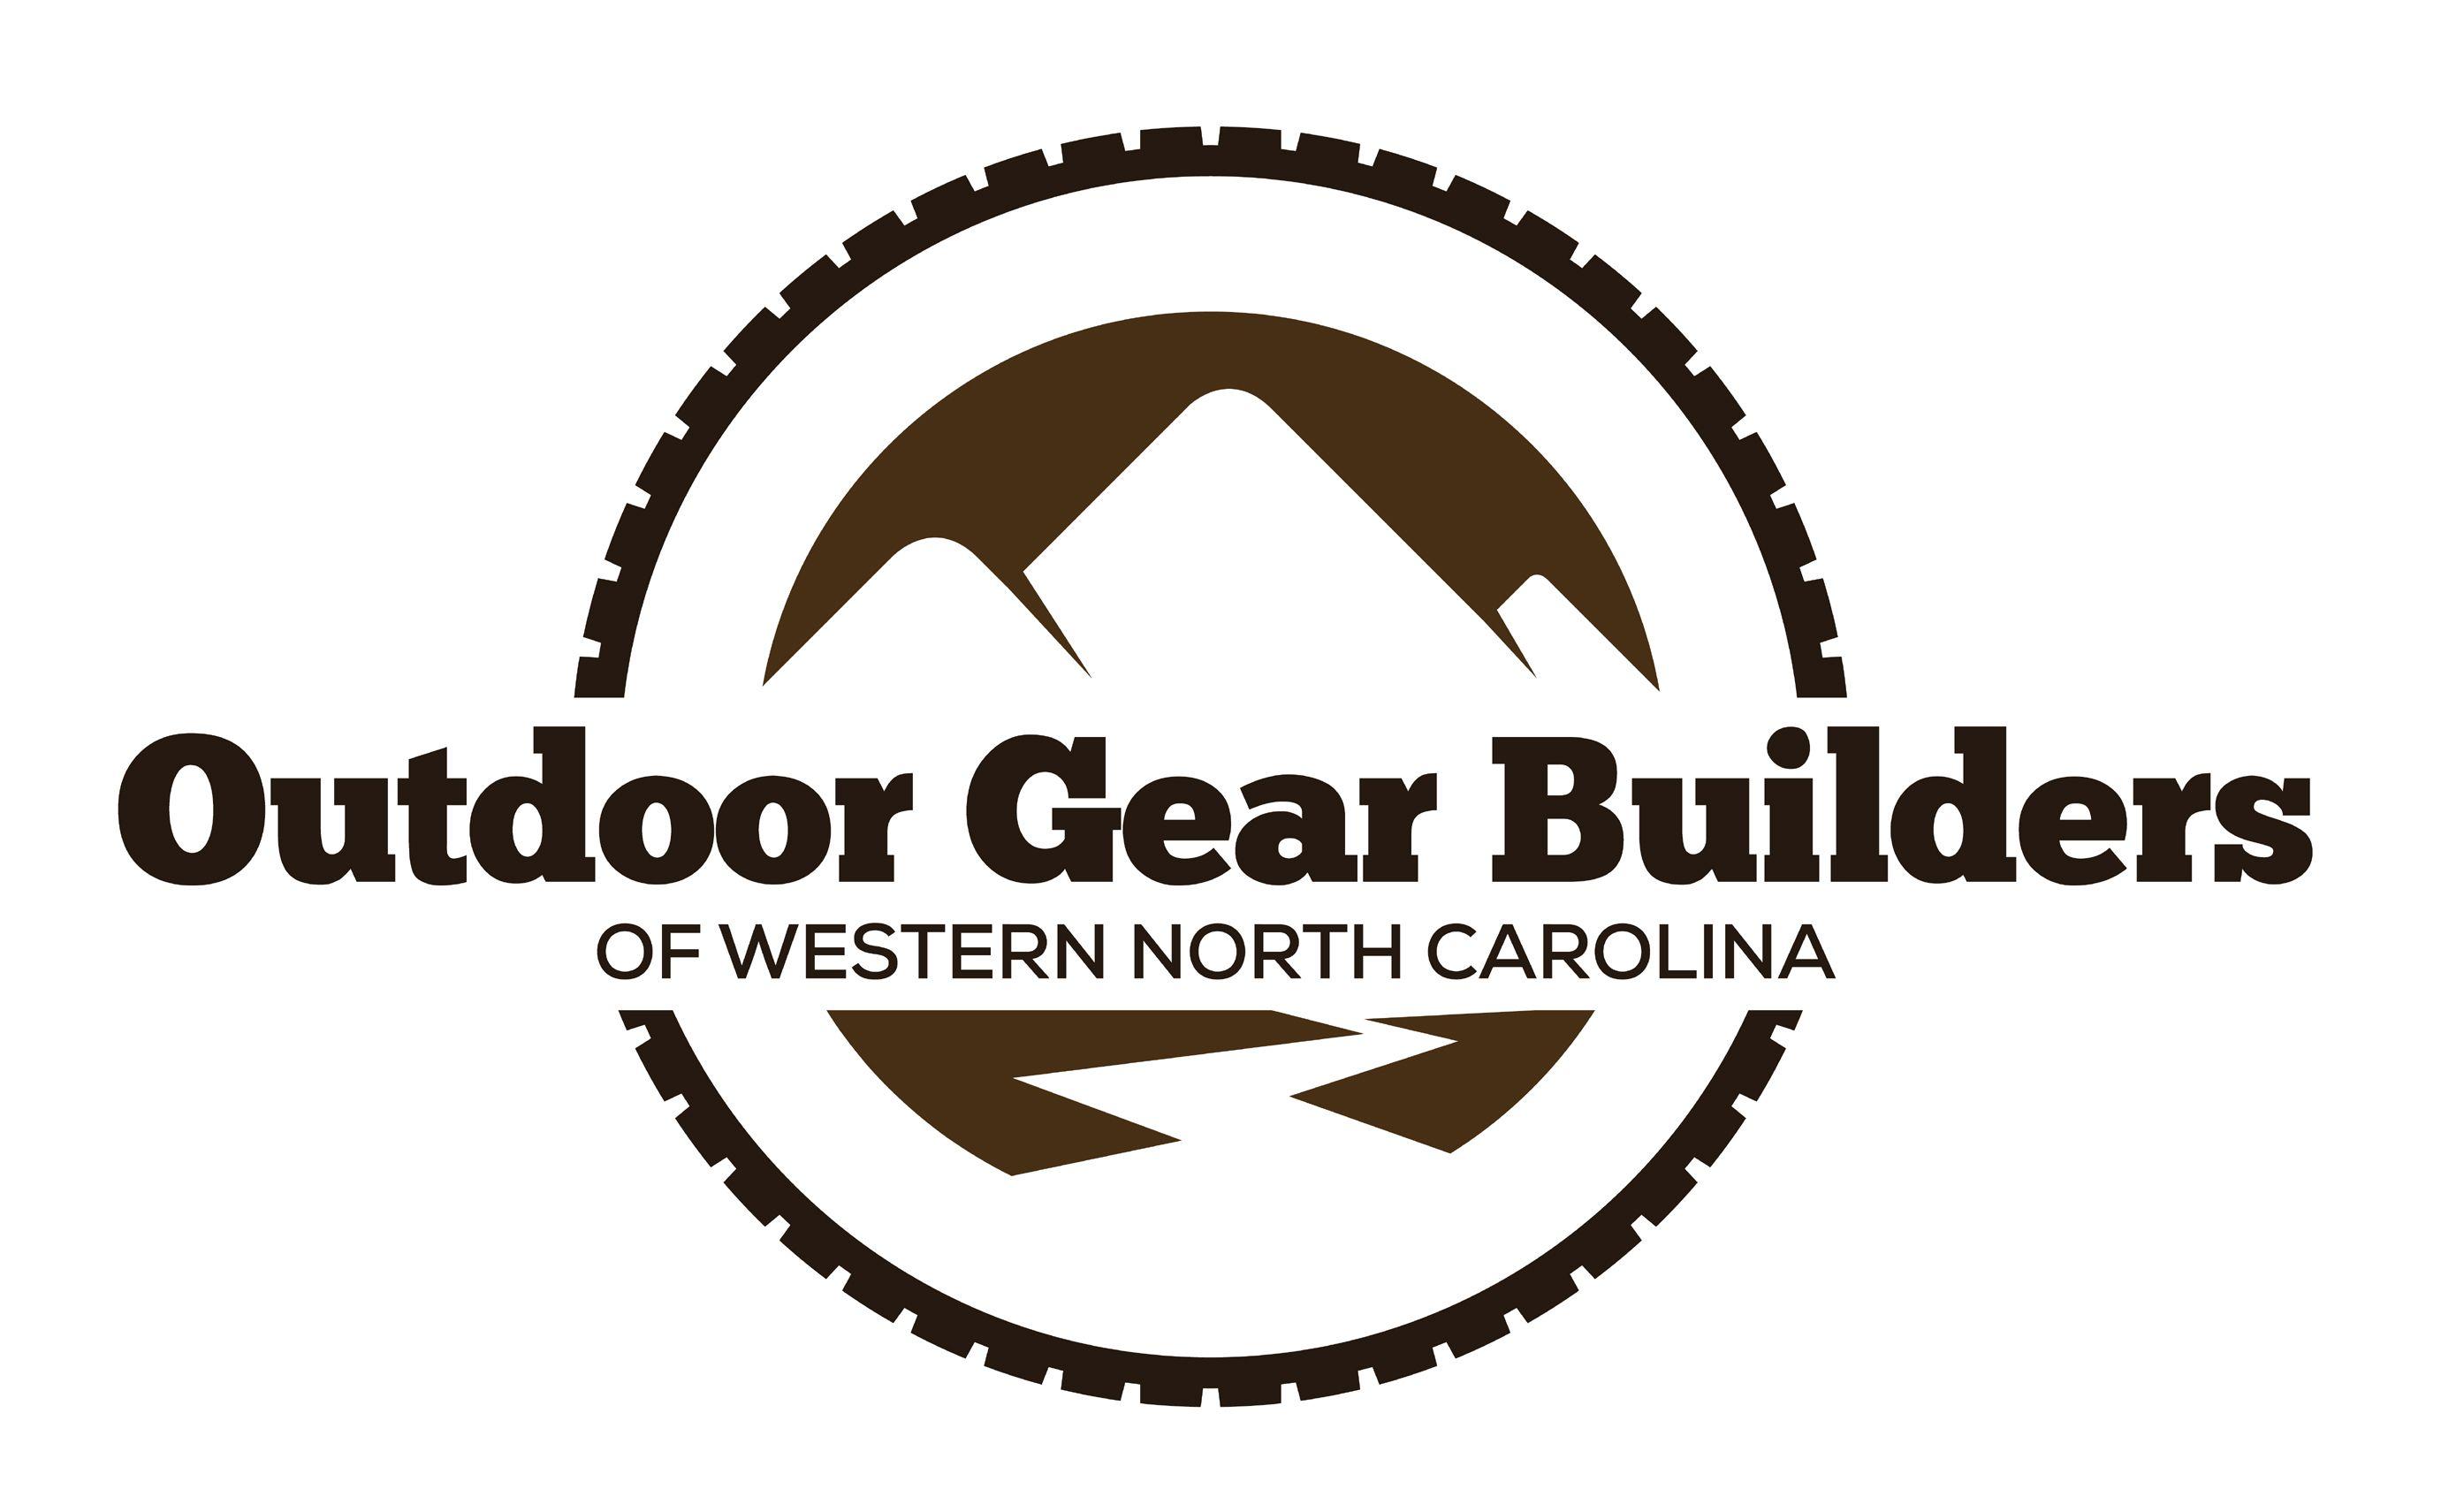 Outdoor Clothing Company Logo - Outdoor Gear and Clothing Company Logos Traveling is fun. Hiking